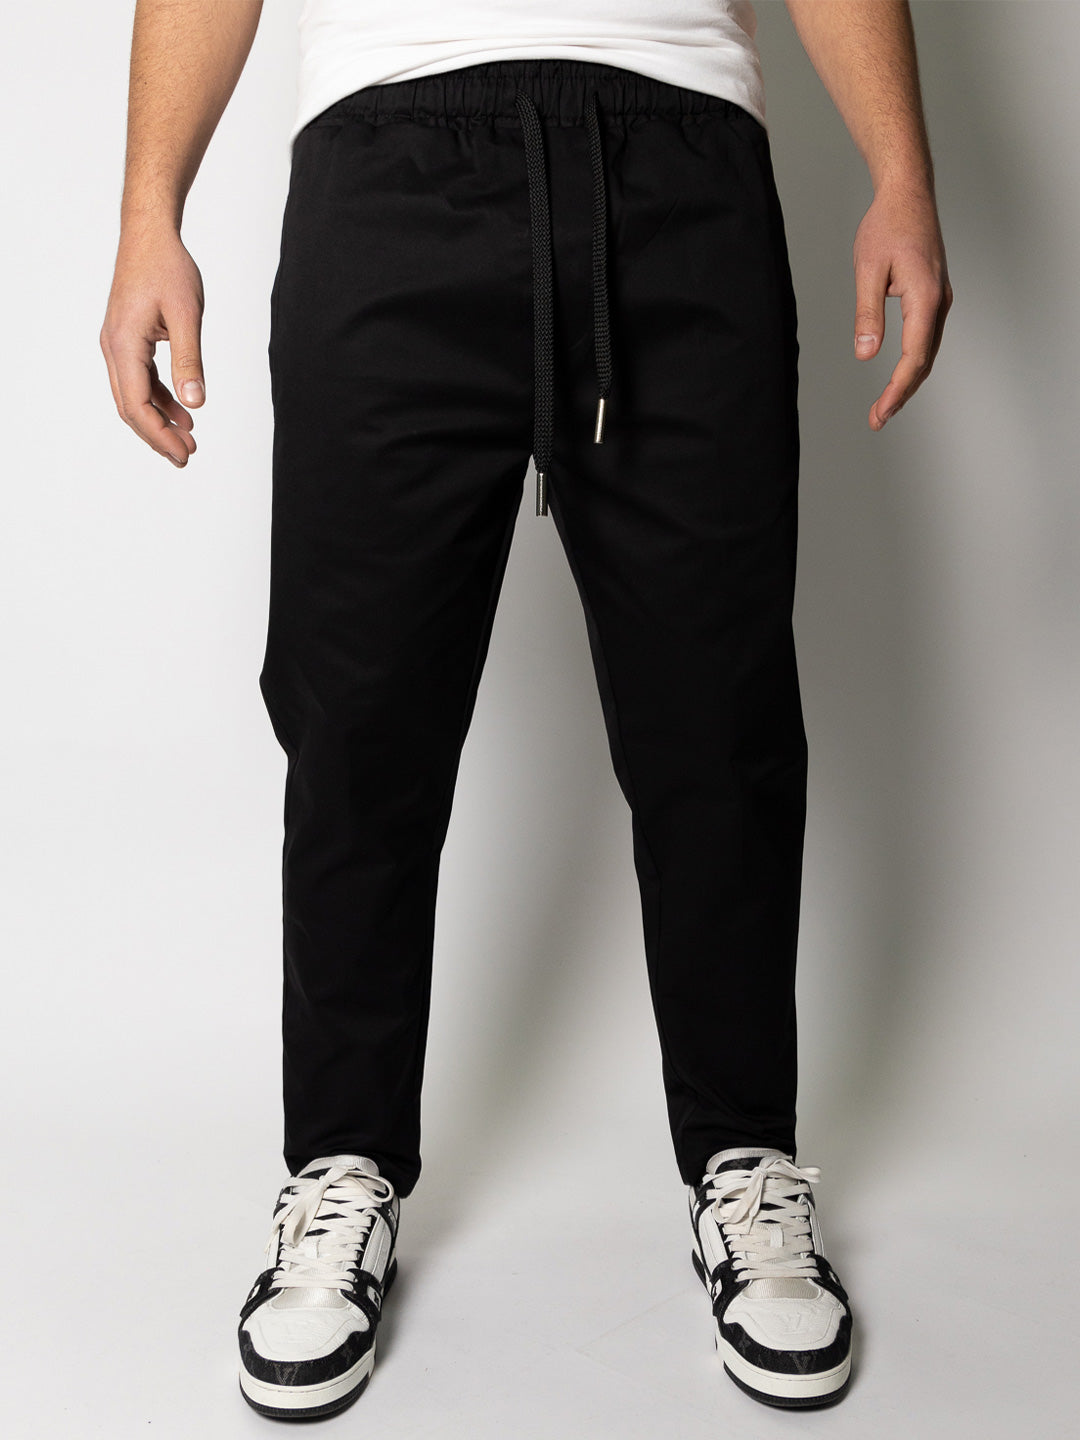 Soldier Nain pantalone nero basic con coulisse